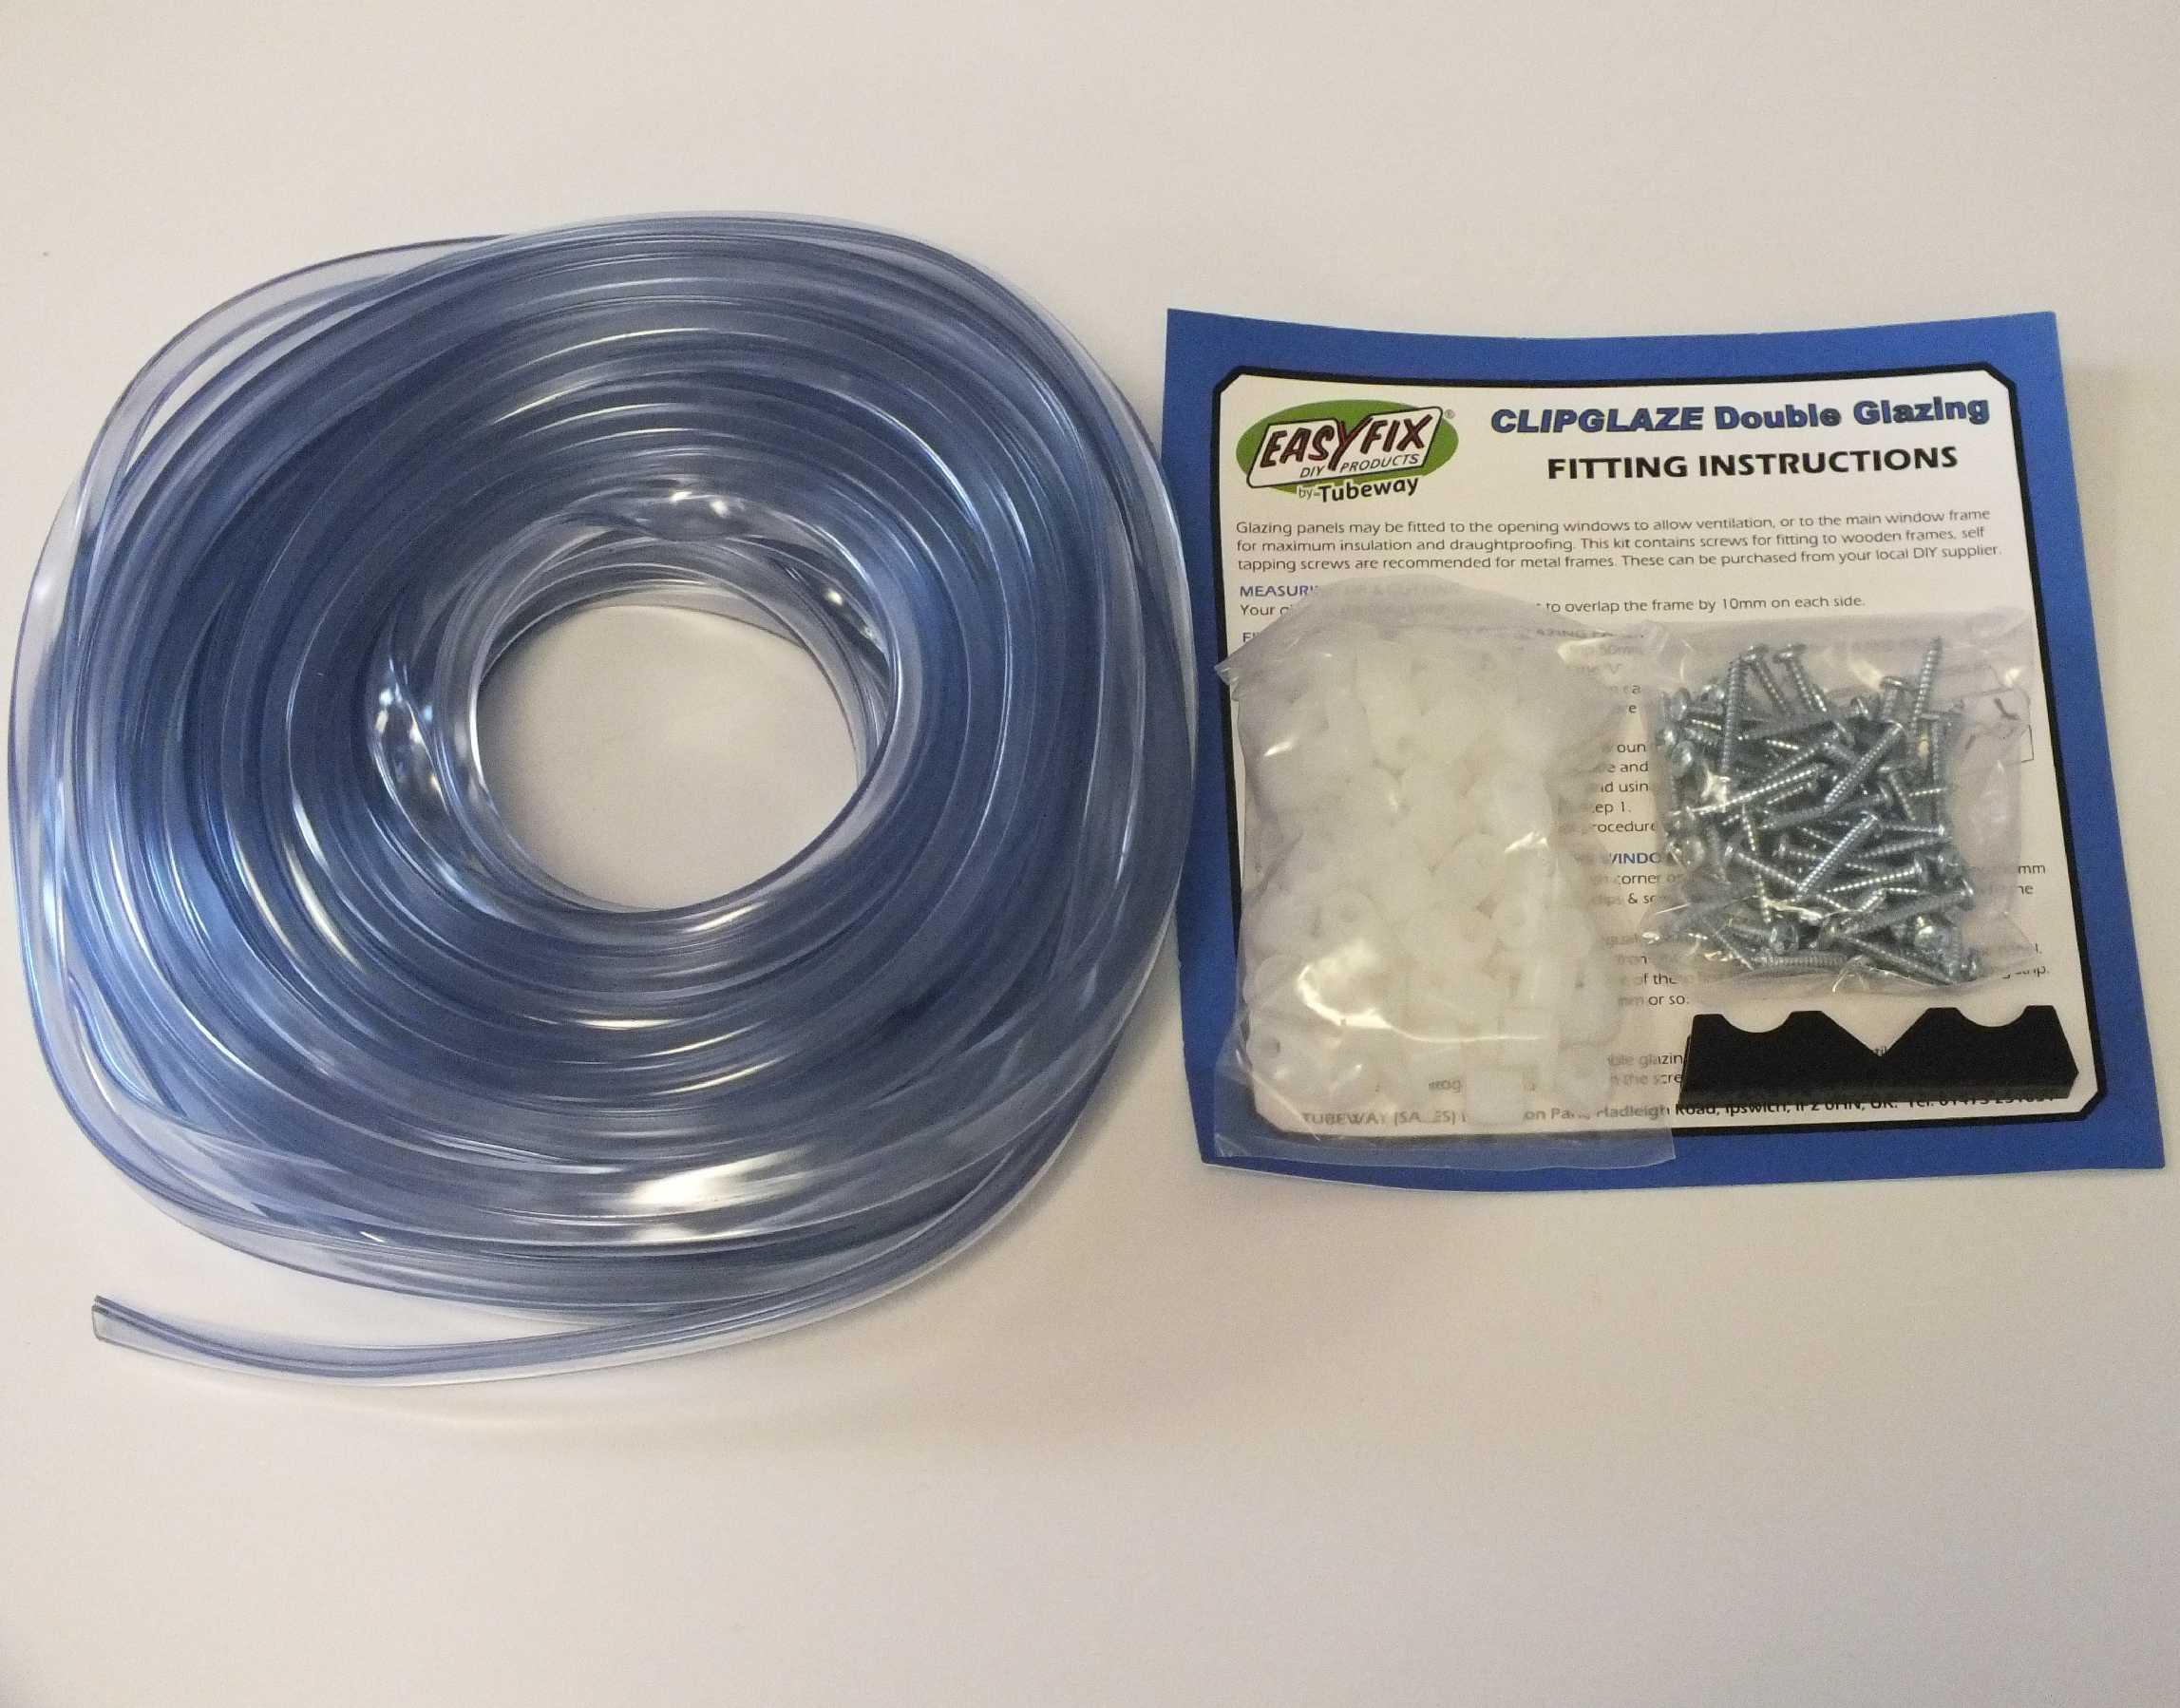 Buy Easyfix Clipglaze Edging Kit - 15m roll of edging for 6mm Glazing Thickness, White or Clear online today